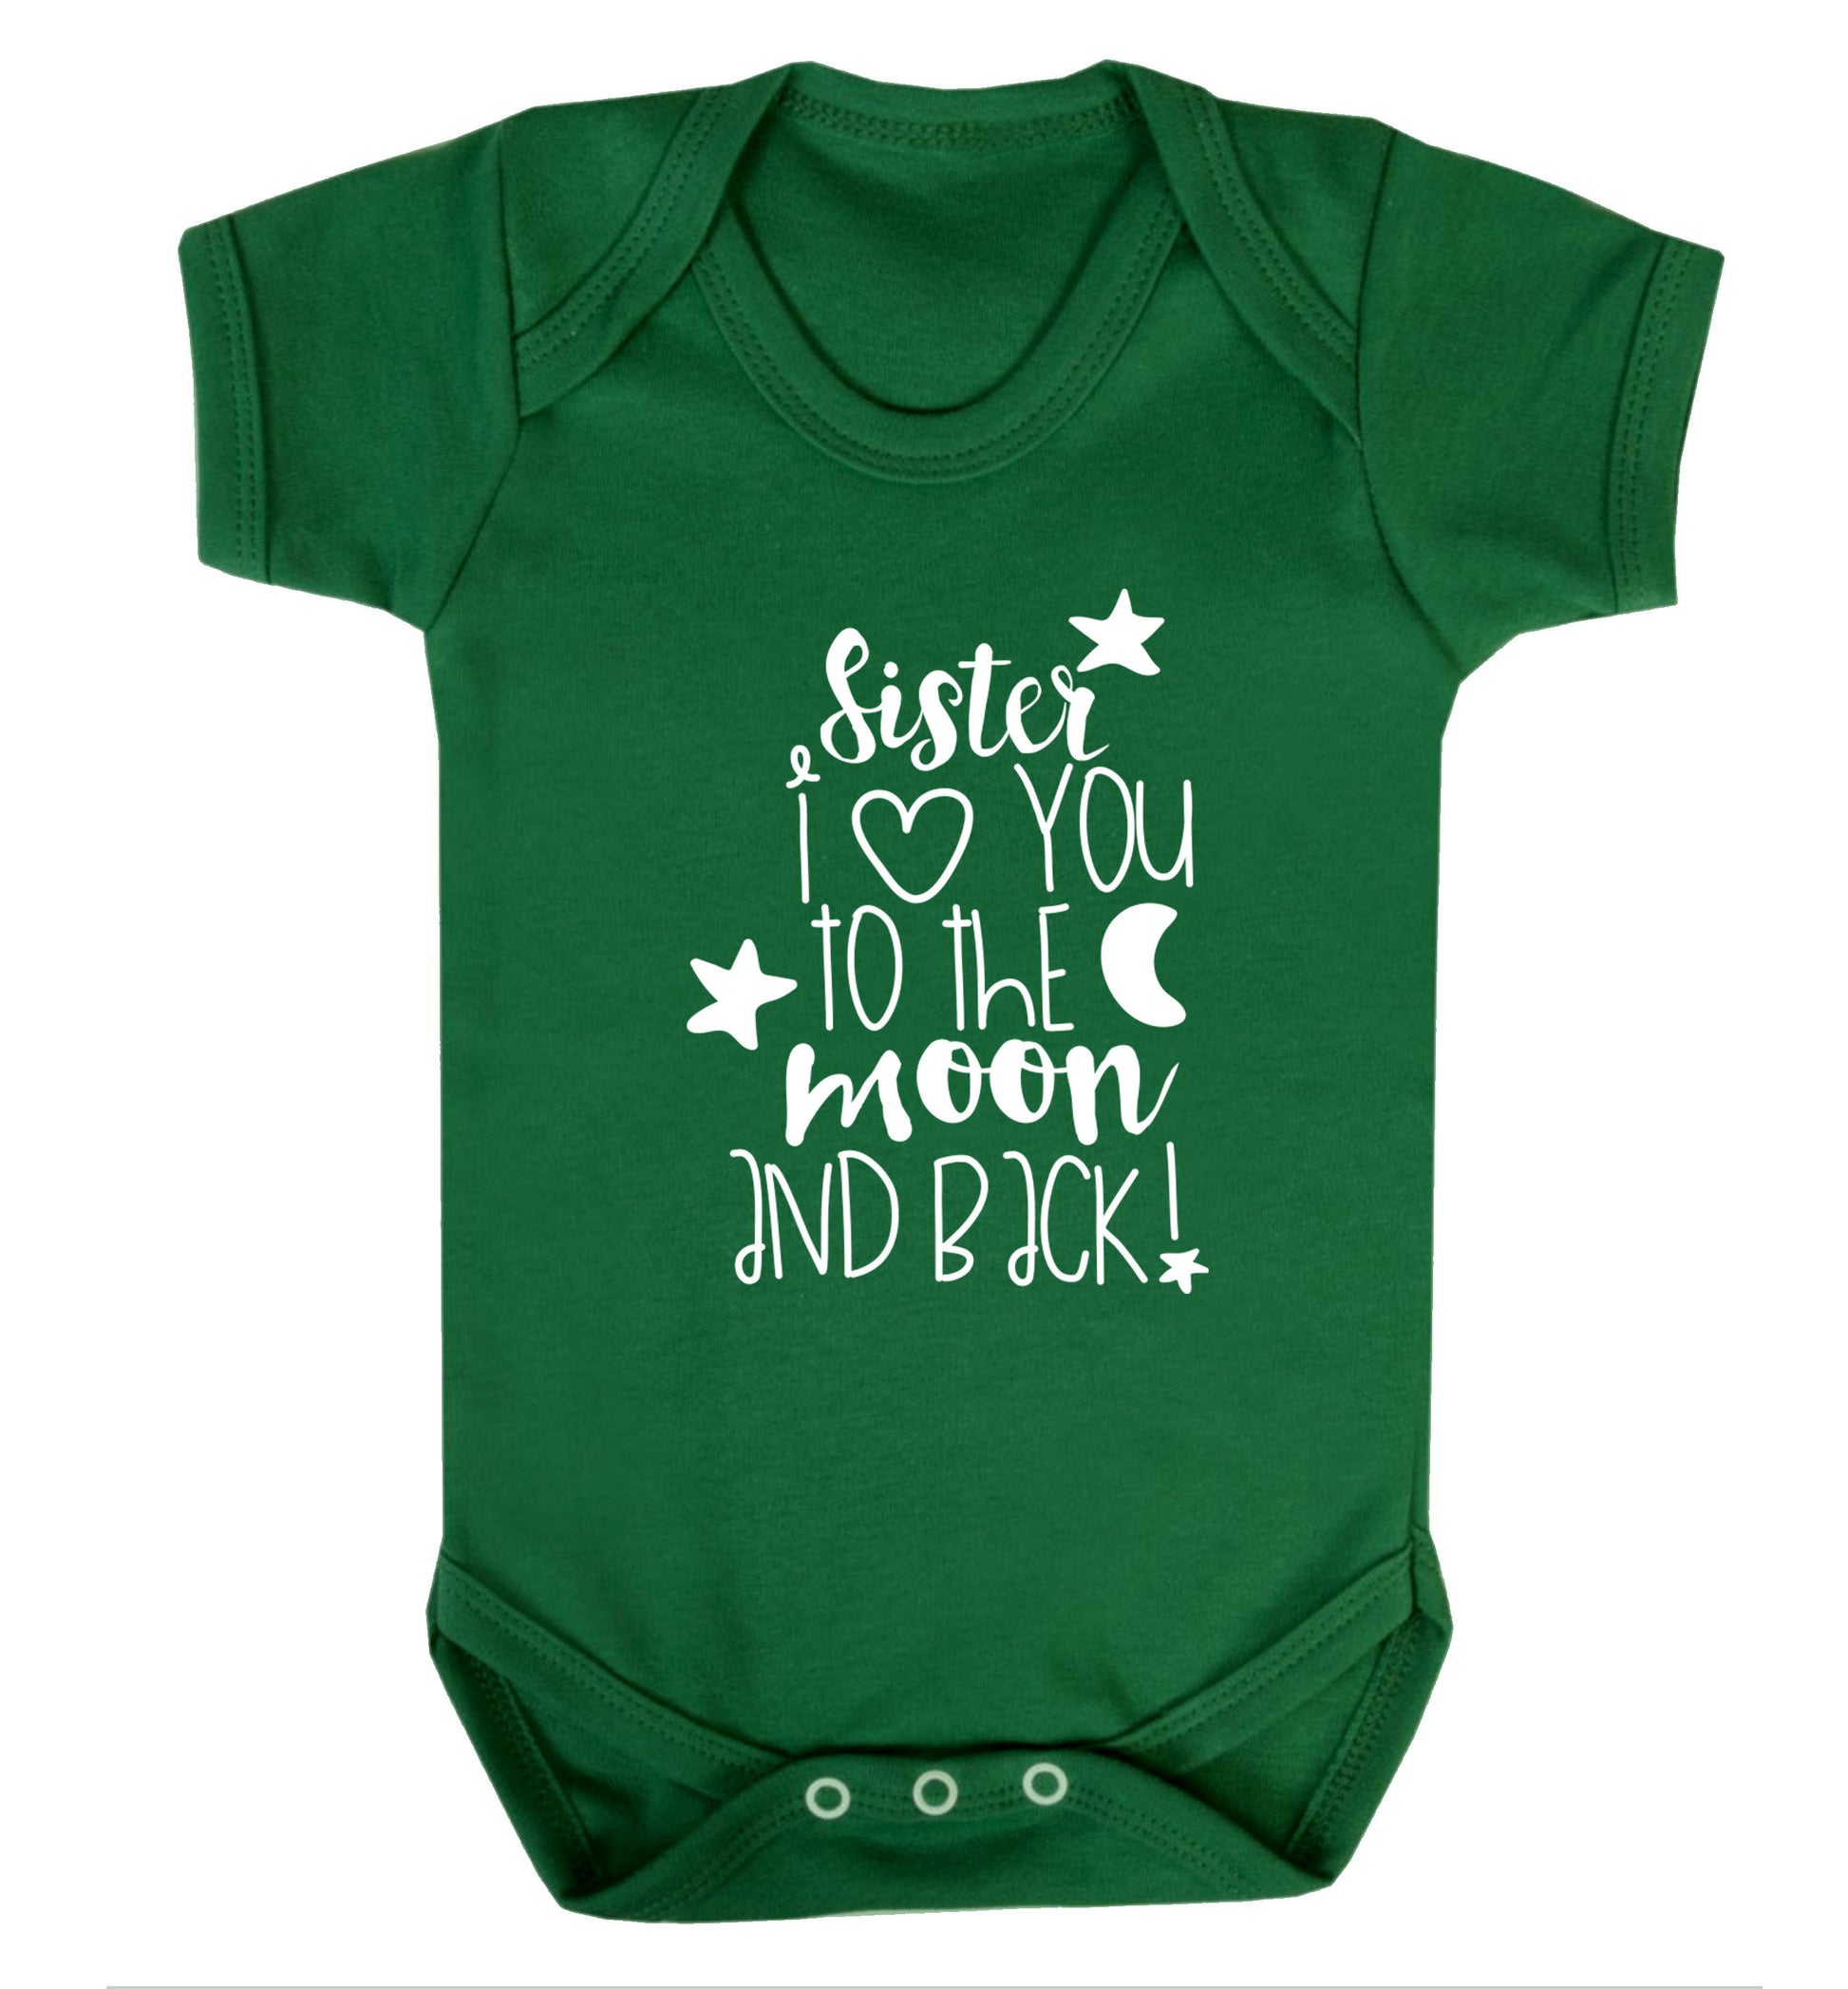 Sister I love you to the moon and back Baby Vest green 18-24 months